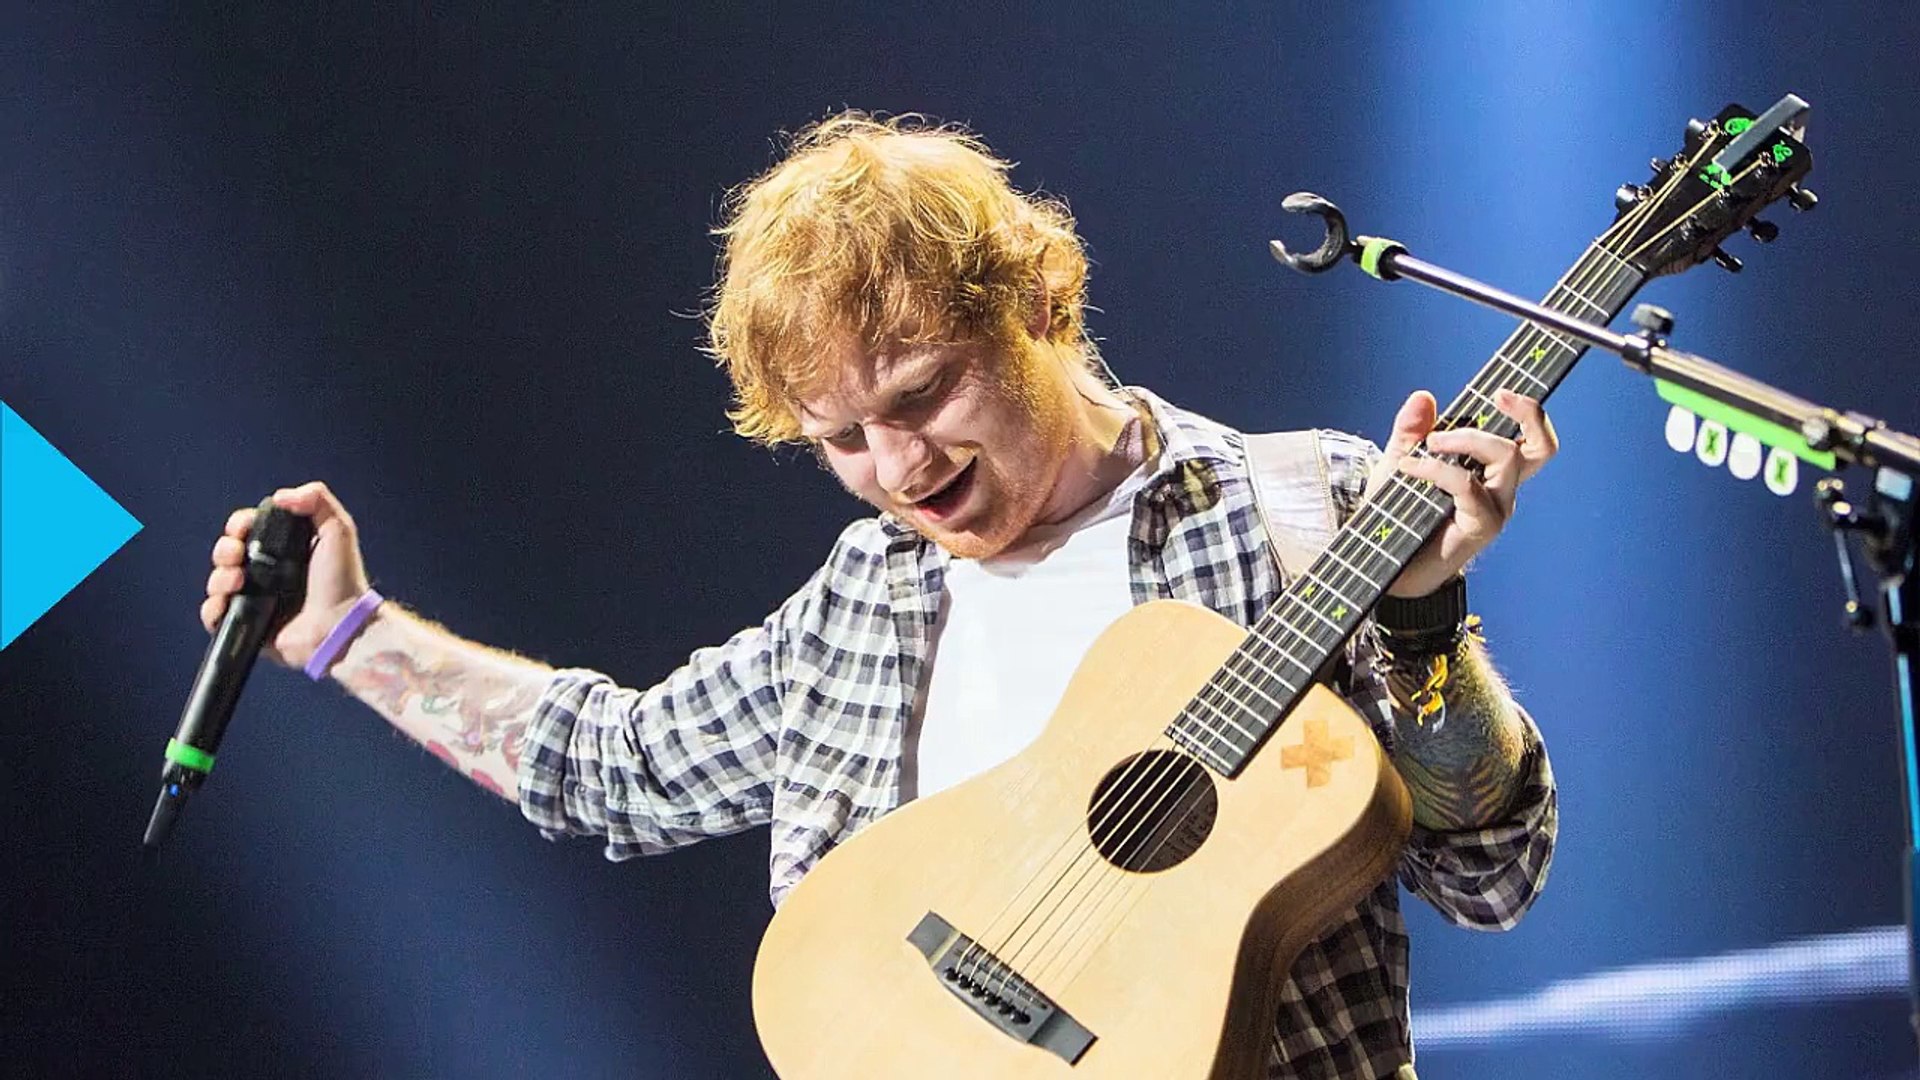 Ed Sheeran Accidentally Poops During Concert